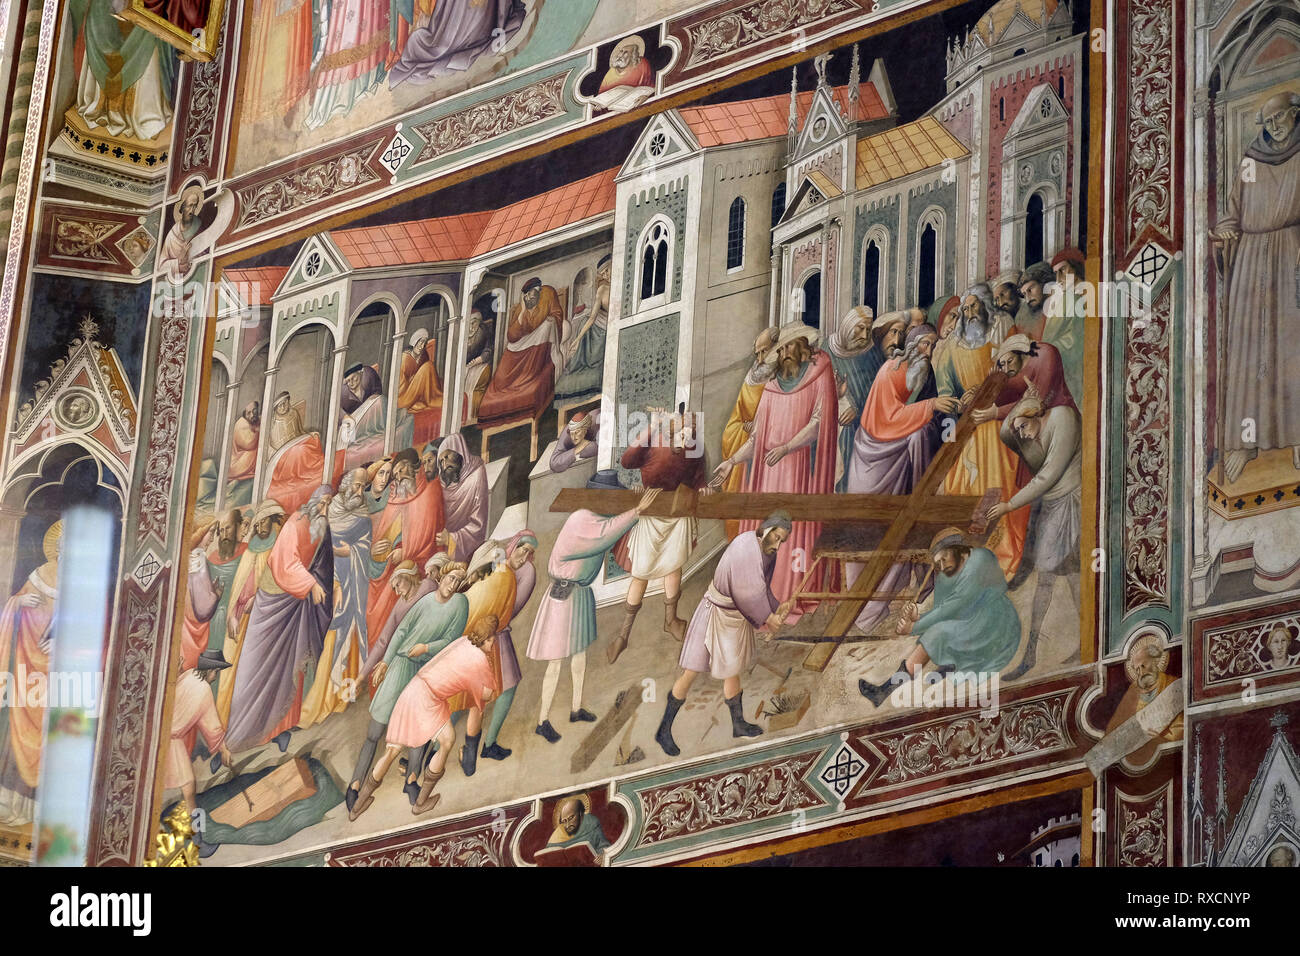 The Isrealites pulling up the wood from the pool where it was found to make the True Cross, fresco by Agnolo Gaddi in Basilica Santa Croce in Florence Stock Photo